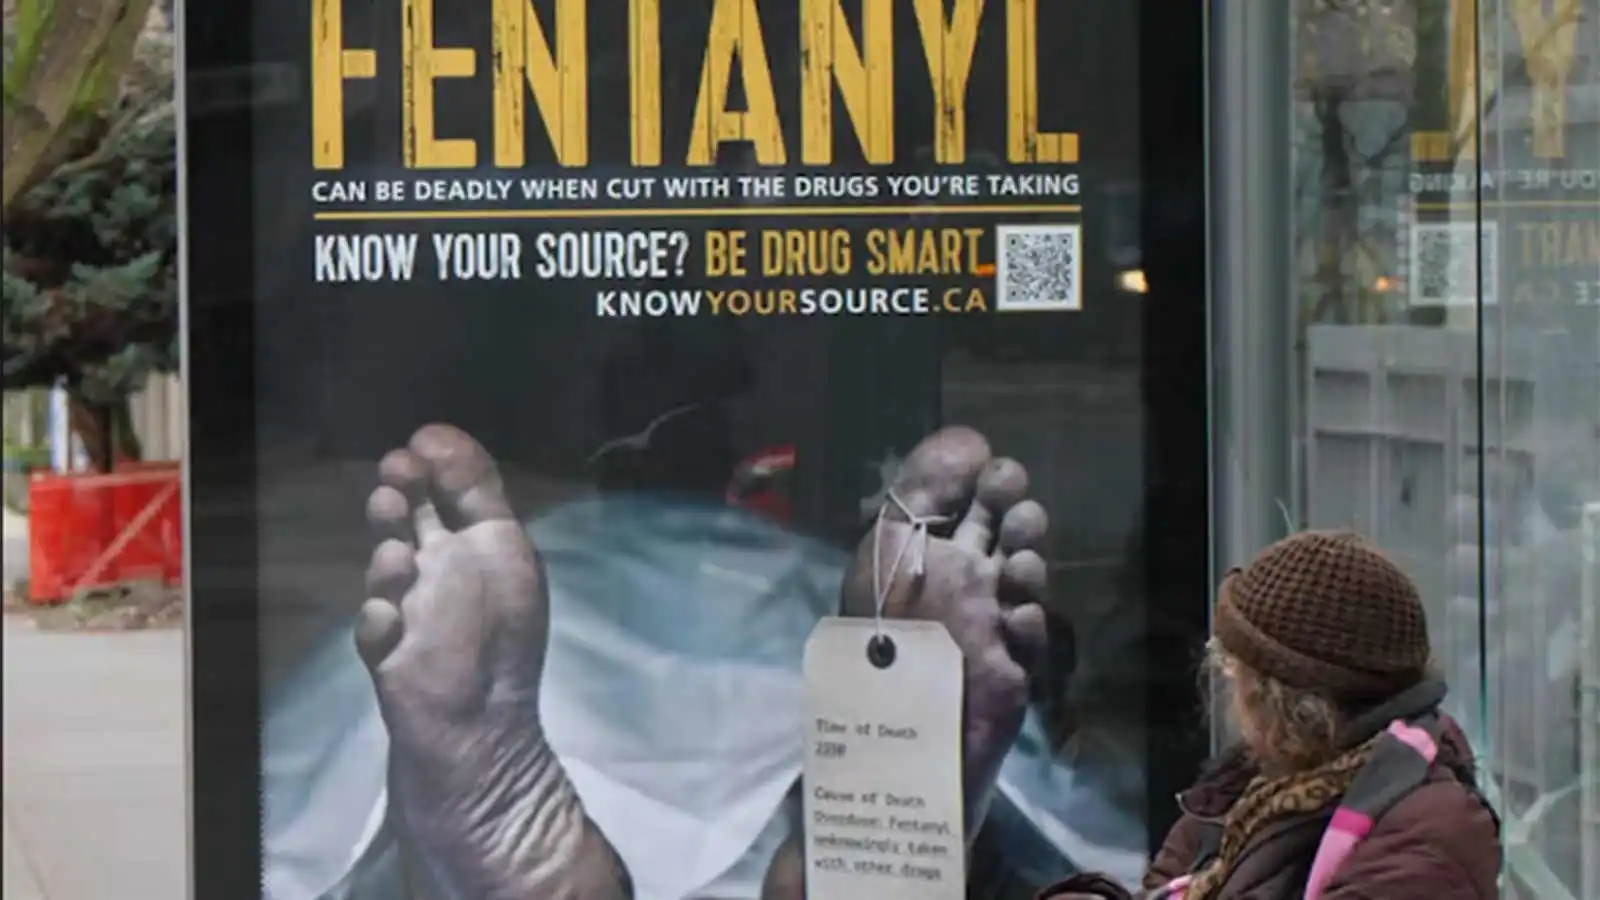 A photo of a fentanyl cautionary board in a public place, with someone standing in front of it.